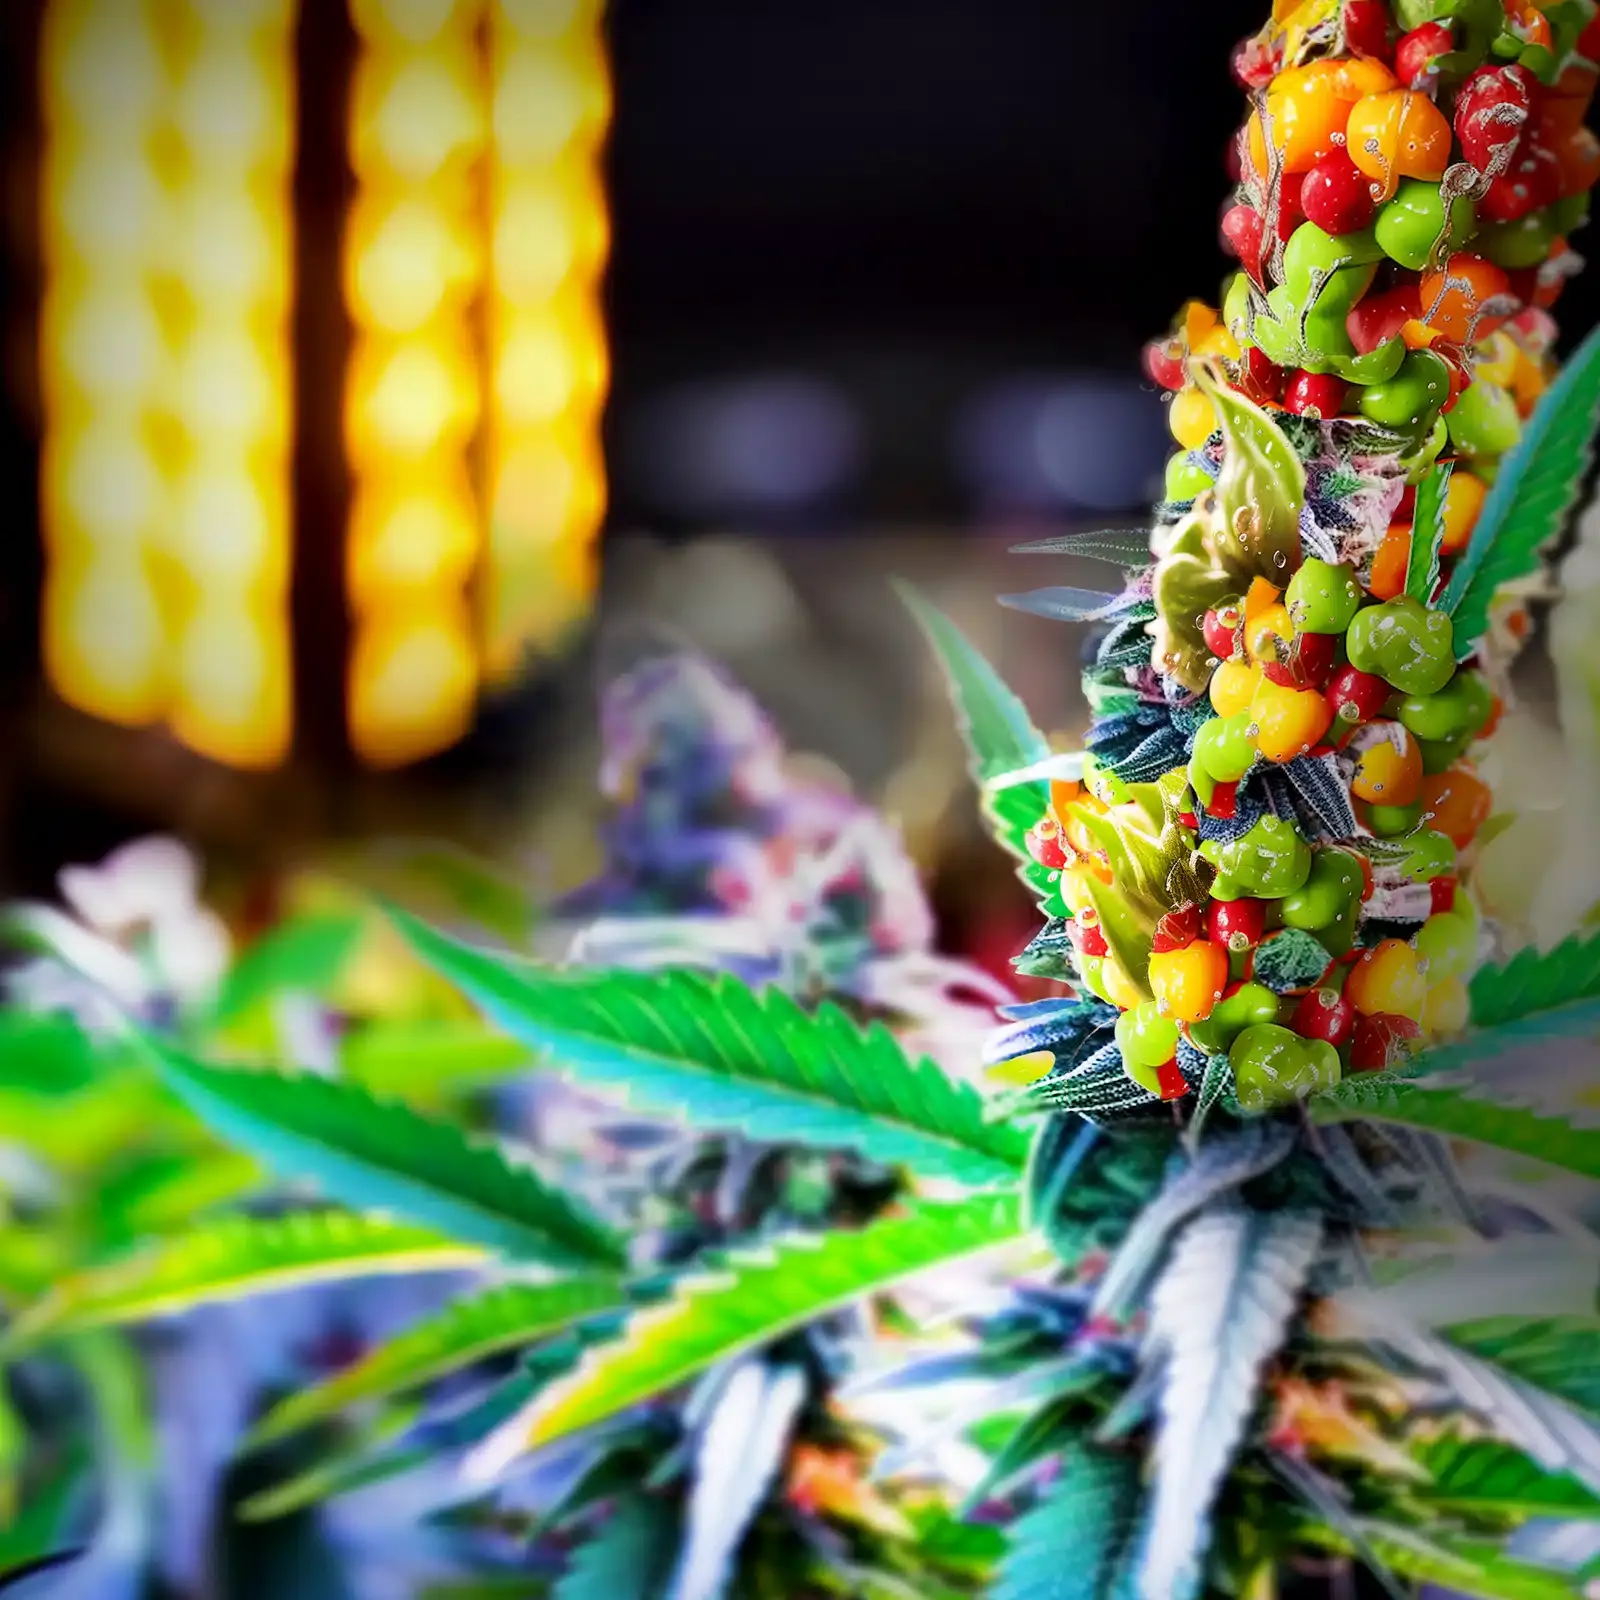 A nerd rope cannabis edible gummy is growing out of a marijuana plant with grow lights in the background.